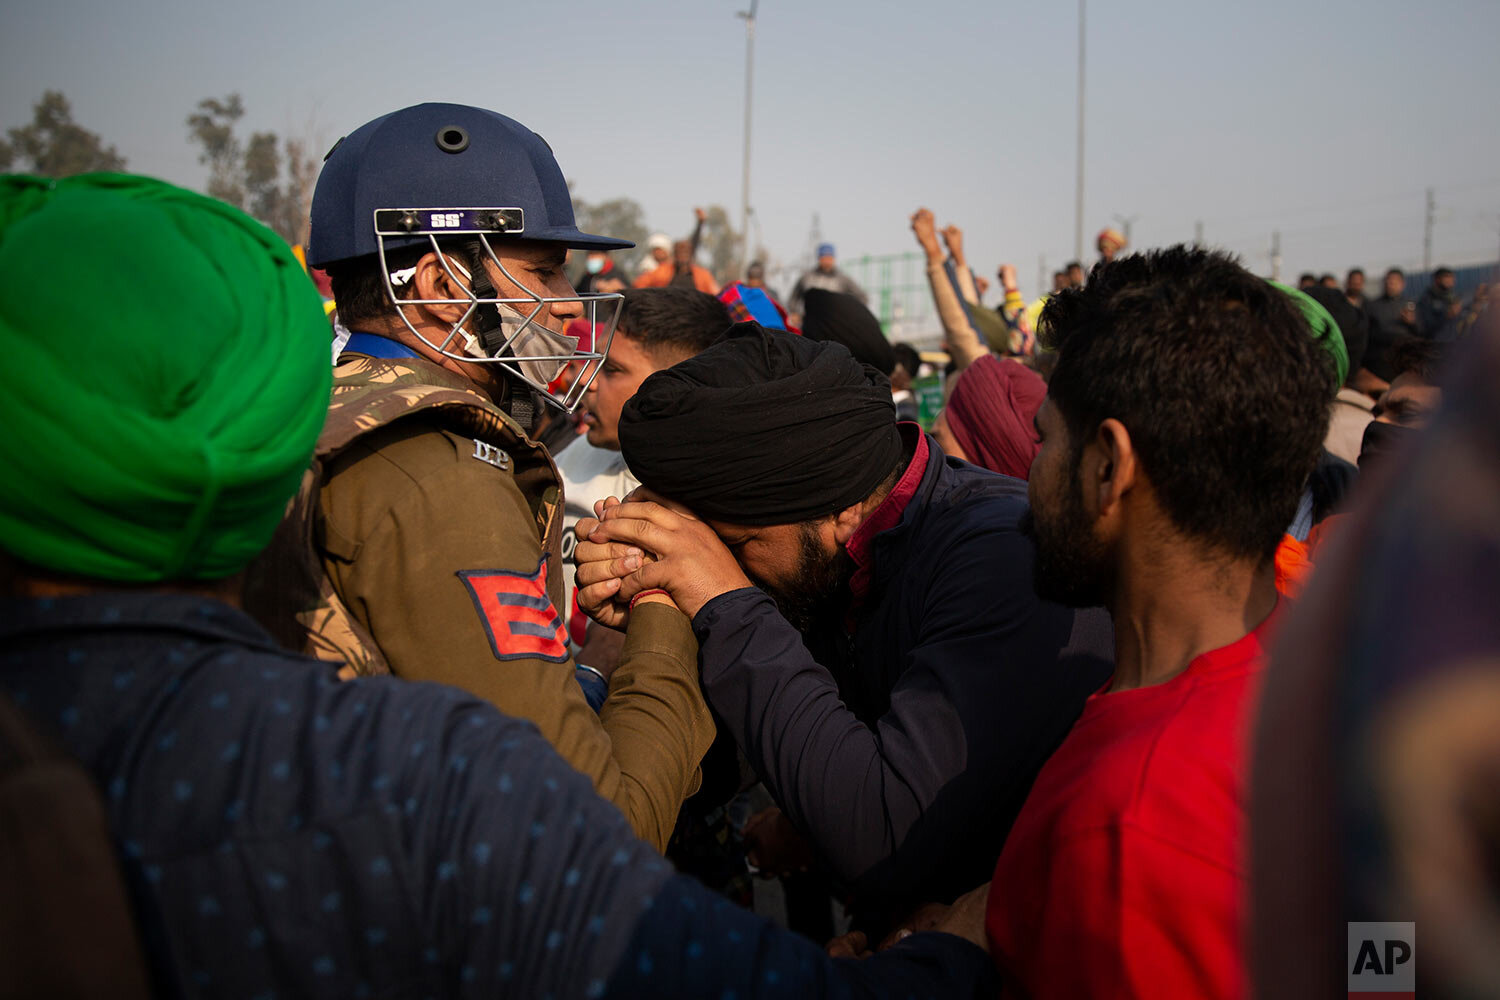  A protesting farmer pleads in front of a police officer to let them pass through a barricade at at the Delhi-Uttar Pradesh state border, India, Tuesday, Jan. 26, 2021. (AP Photo/Altaf Qadri) 